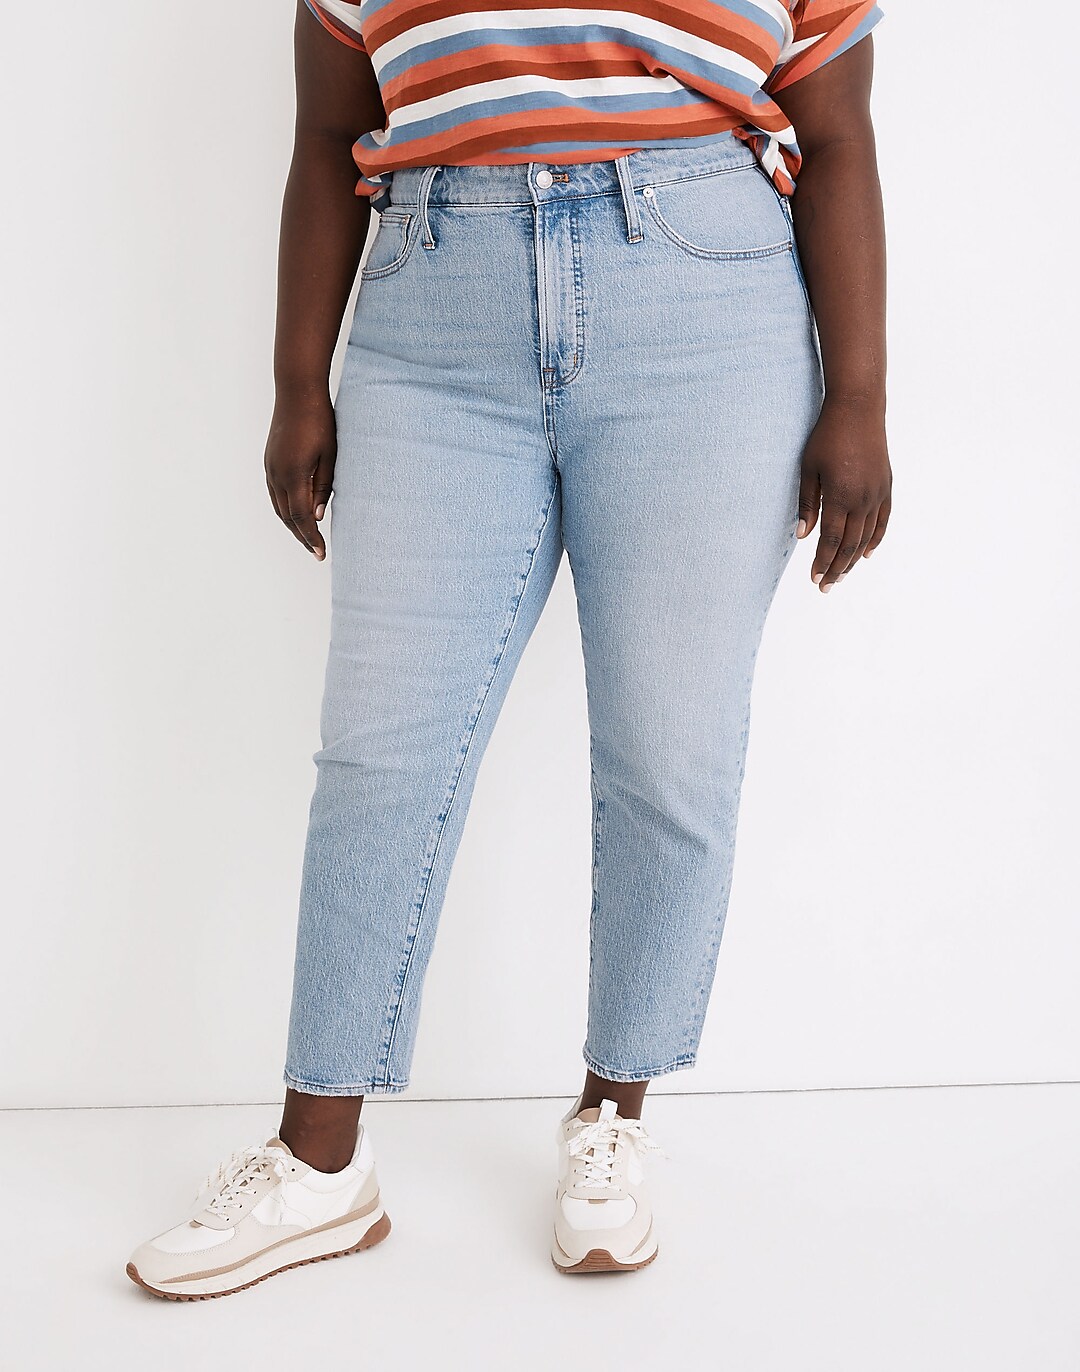 Women's Plus Perfect Vintage Jean in Fiore Wash | Madewell